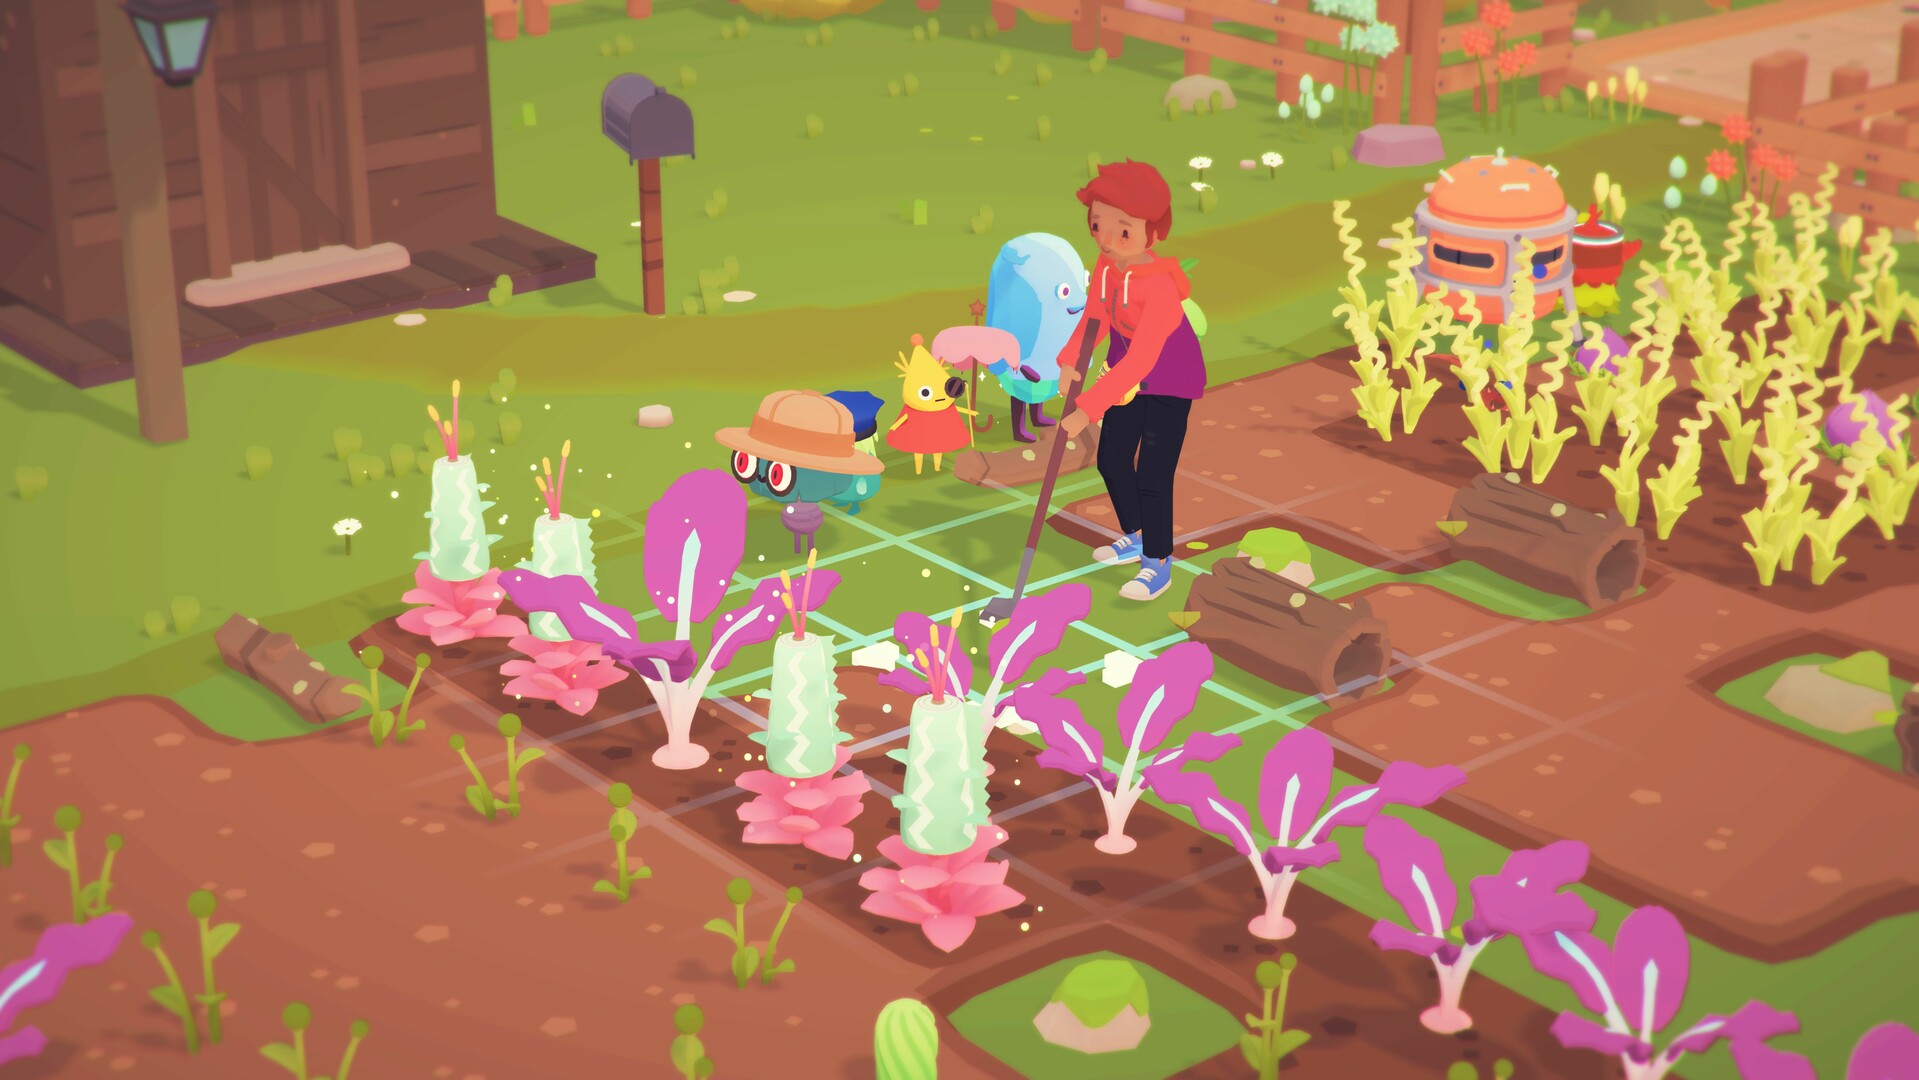 Ooblets